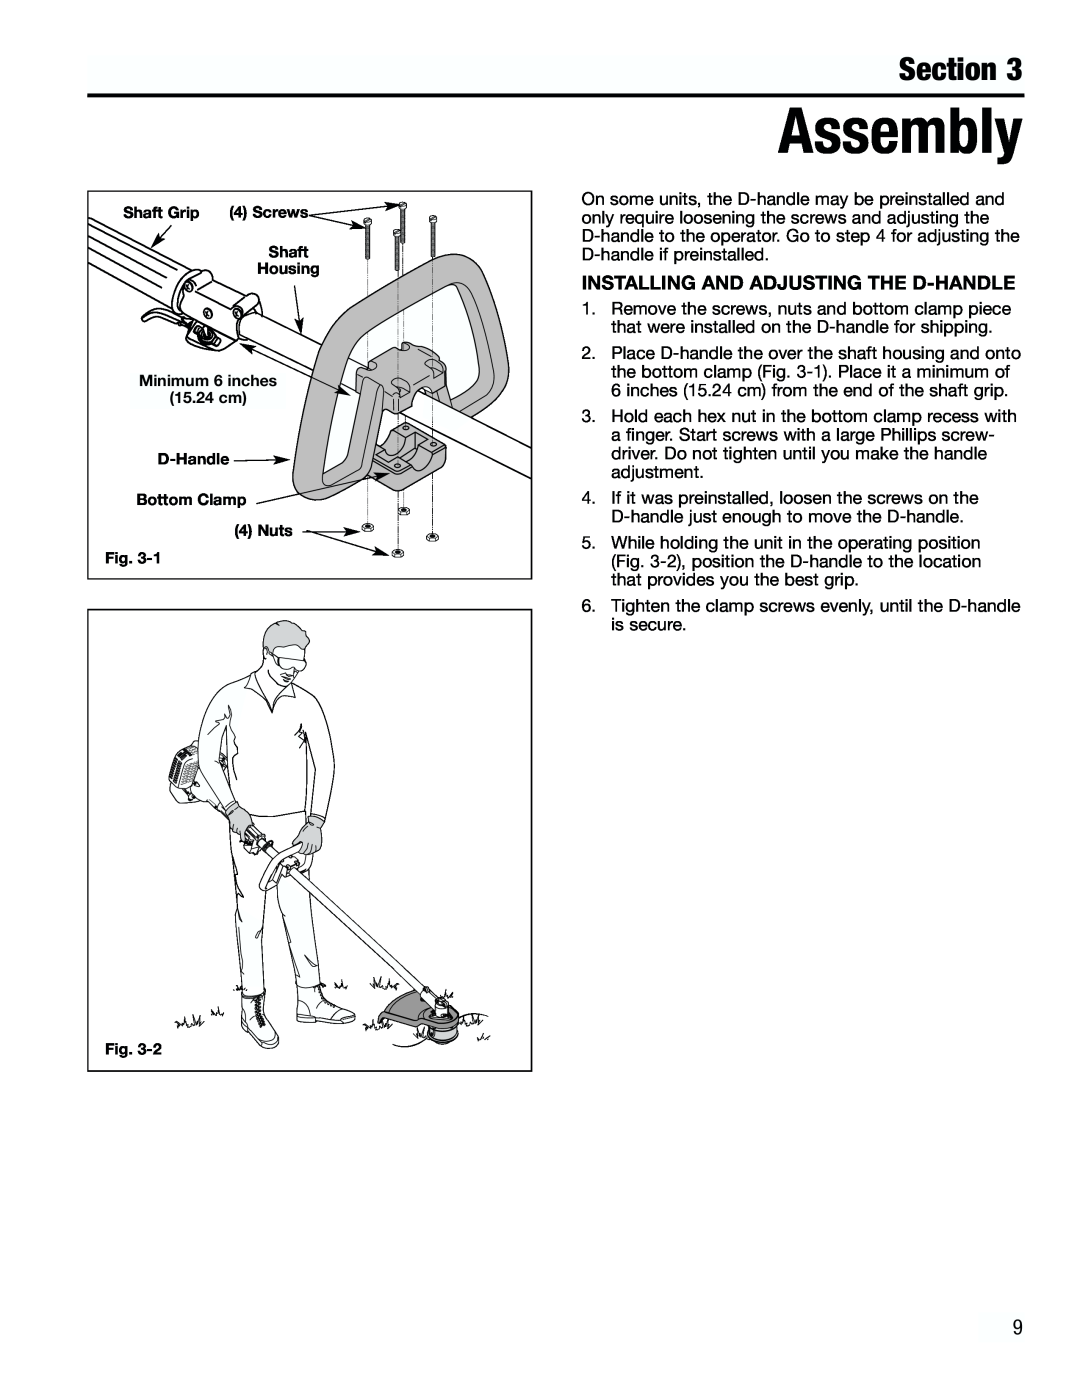 Troy-Bilt TB3000 manual Assembly, Section, Installing And Adjusting The D-Handle 